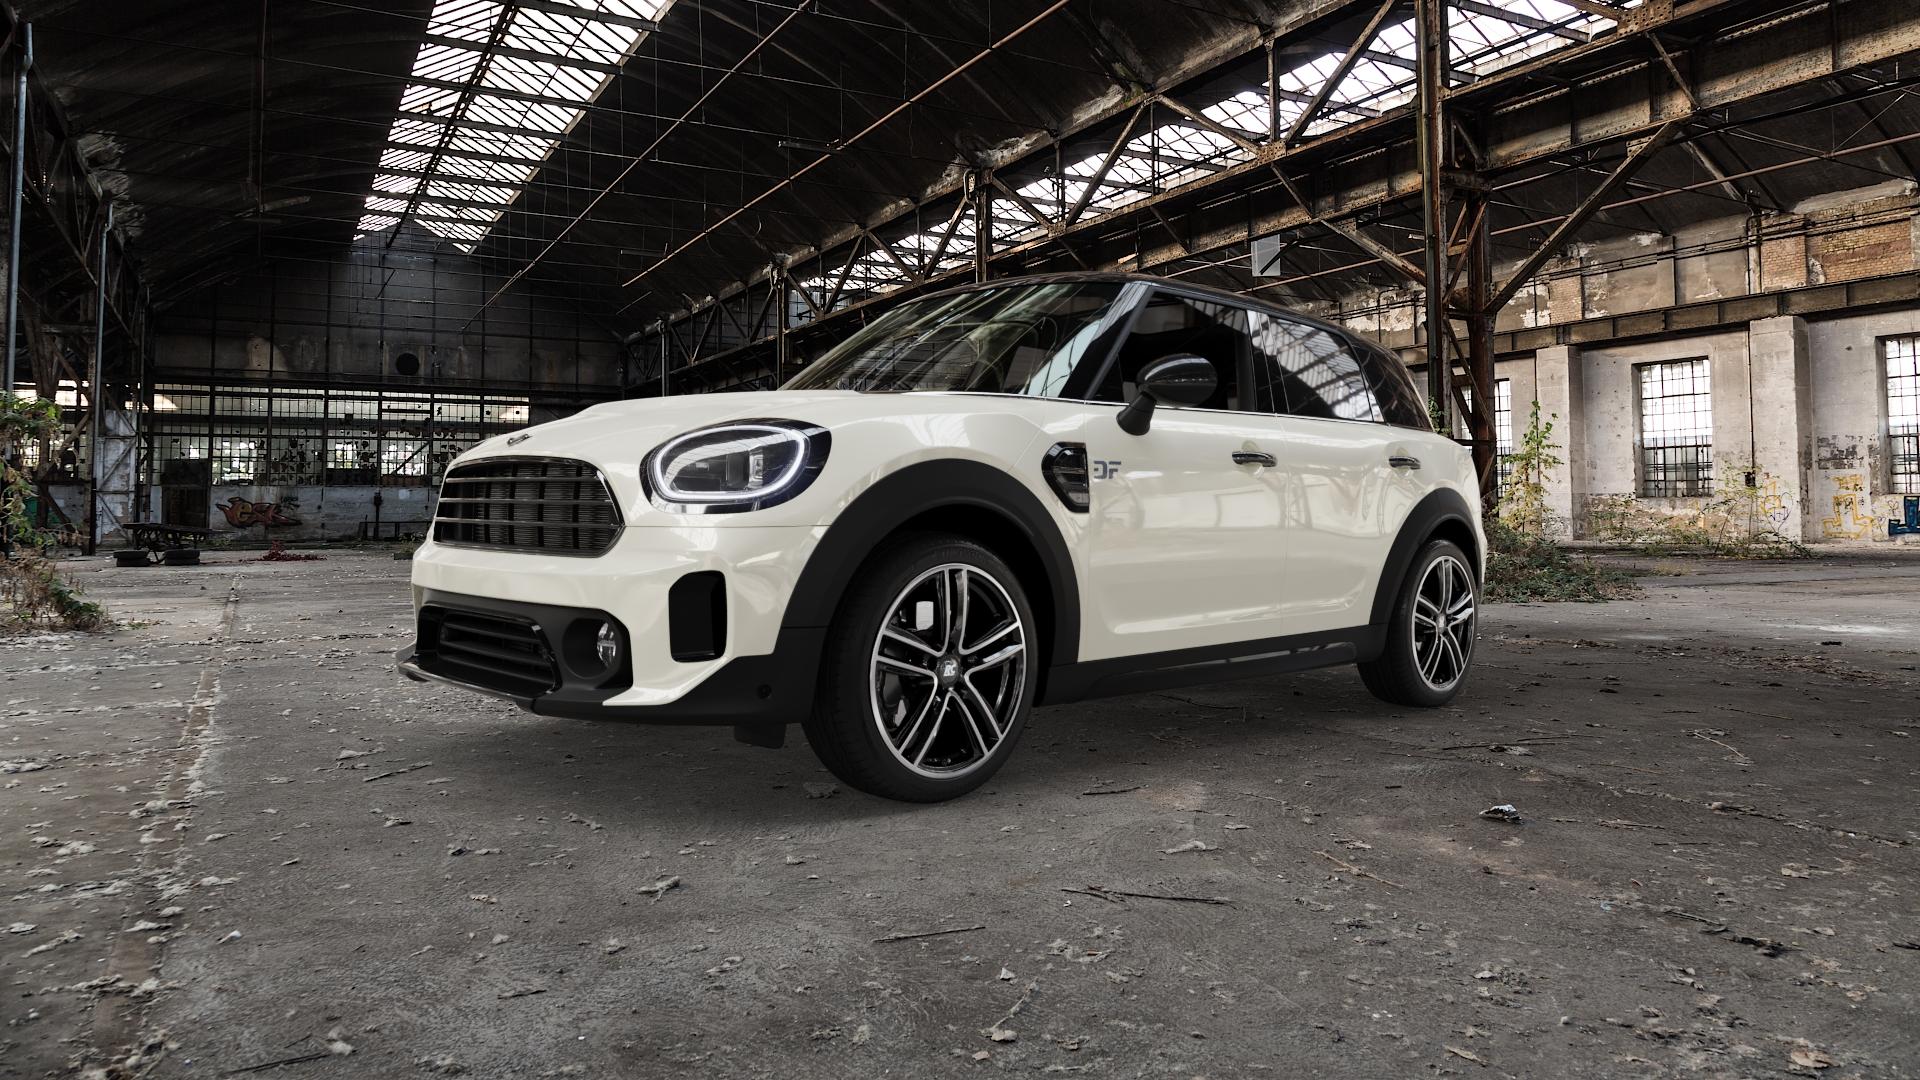 Mini F60 Type FMX (Countryman) Facelift 1,5l Cooper 100kW (136 hp) Wheels  and Tyre Packages | velonity.com